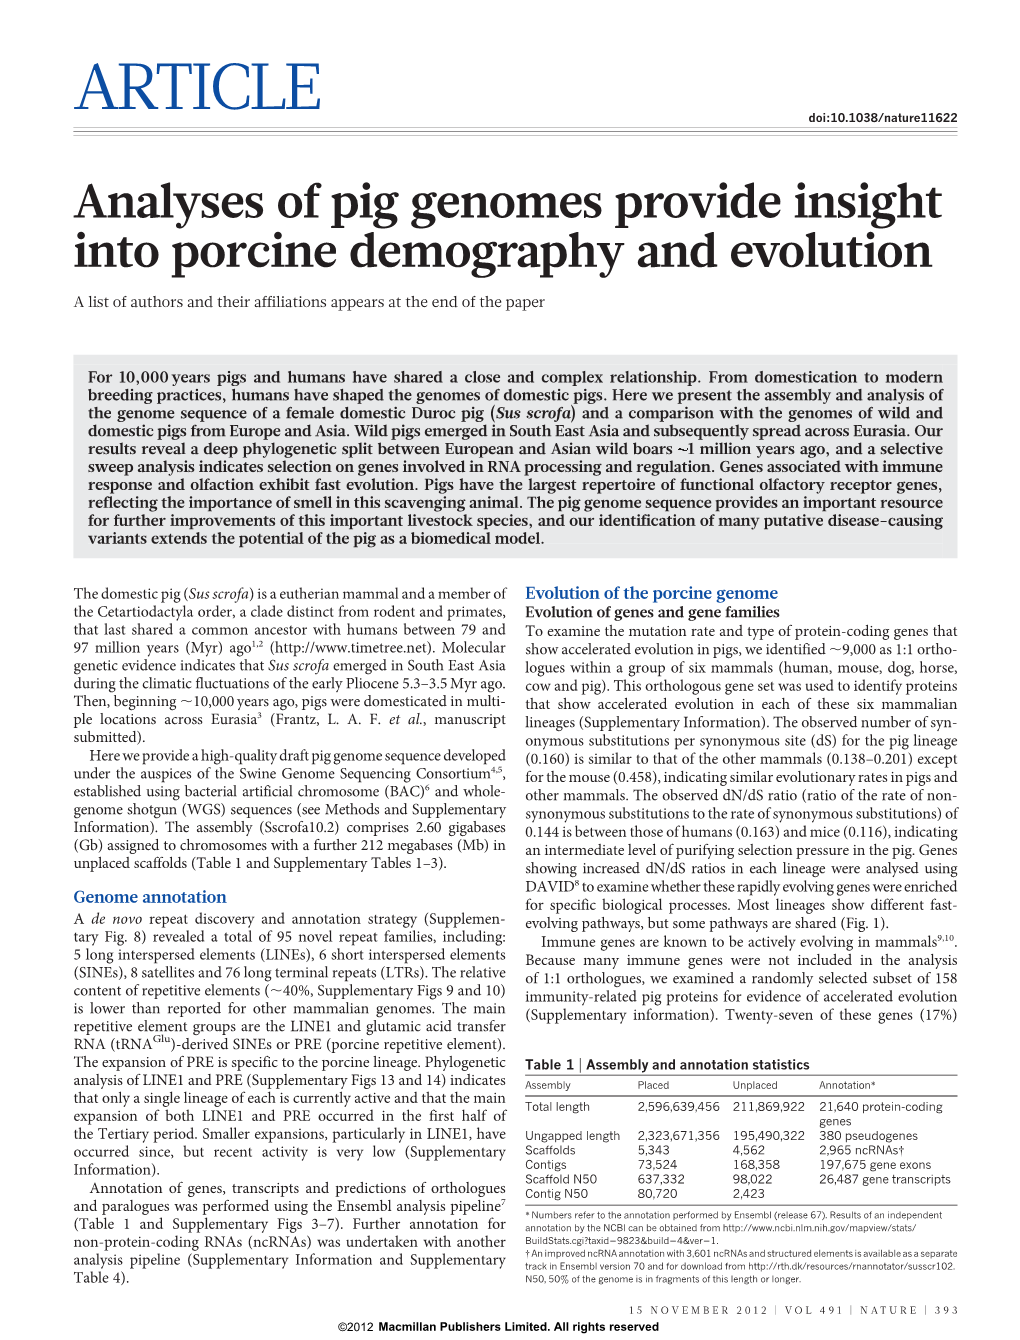 Analyses of Pig Genomes Provide Insight Into Porcine Demography and Evolution